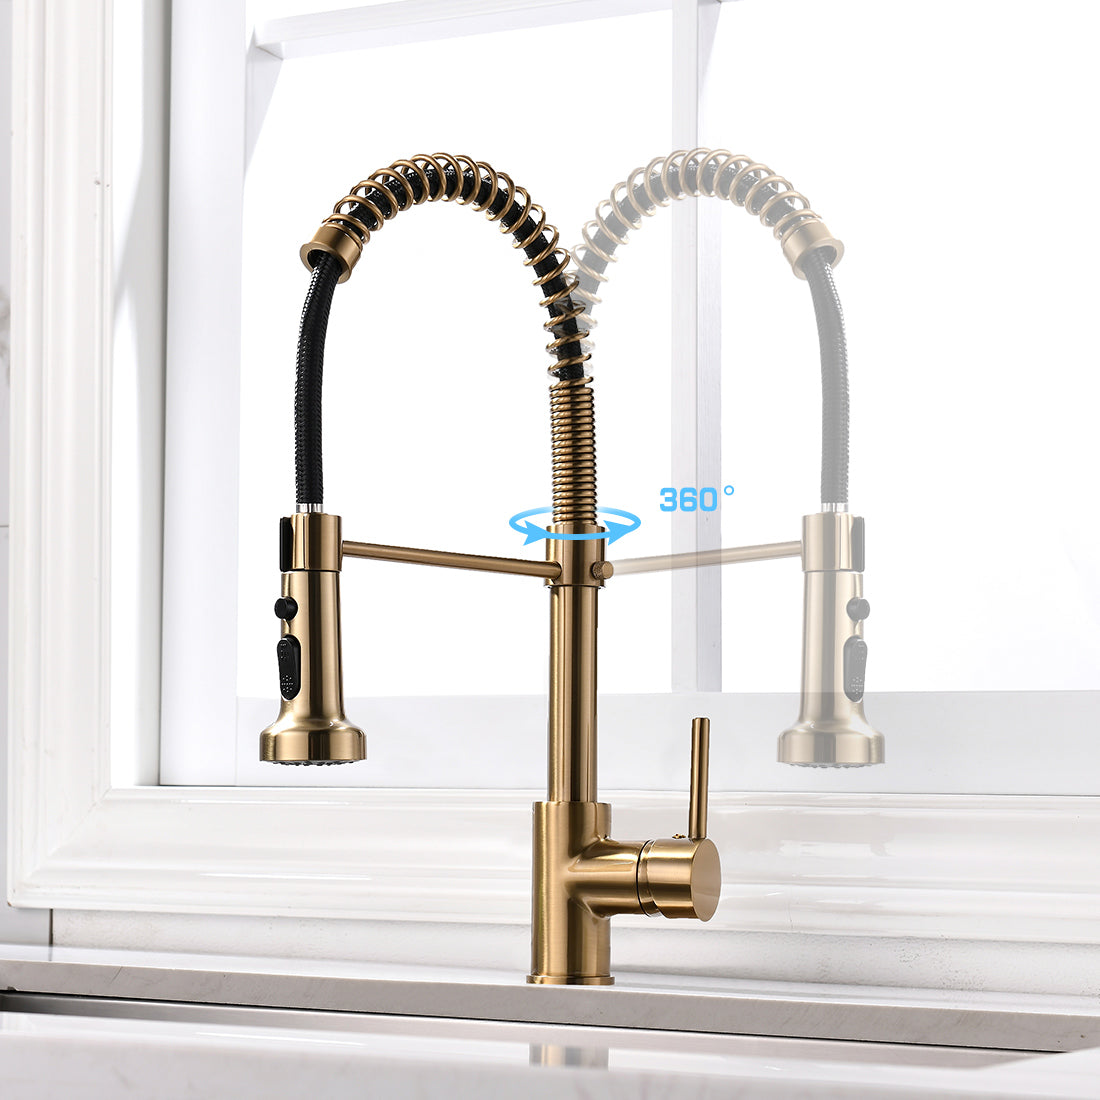 InArt Single Lever Kitchen Sink Mixer 360° Pull-Down Sprayer Kitchen Faucet with Multi-Function Spray Head, Brushed Gold KSF025 - InArt-Studio